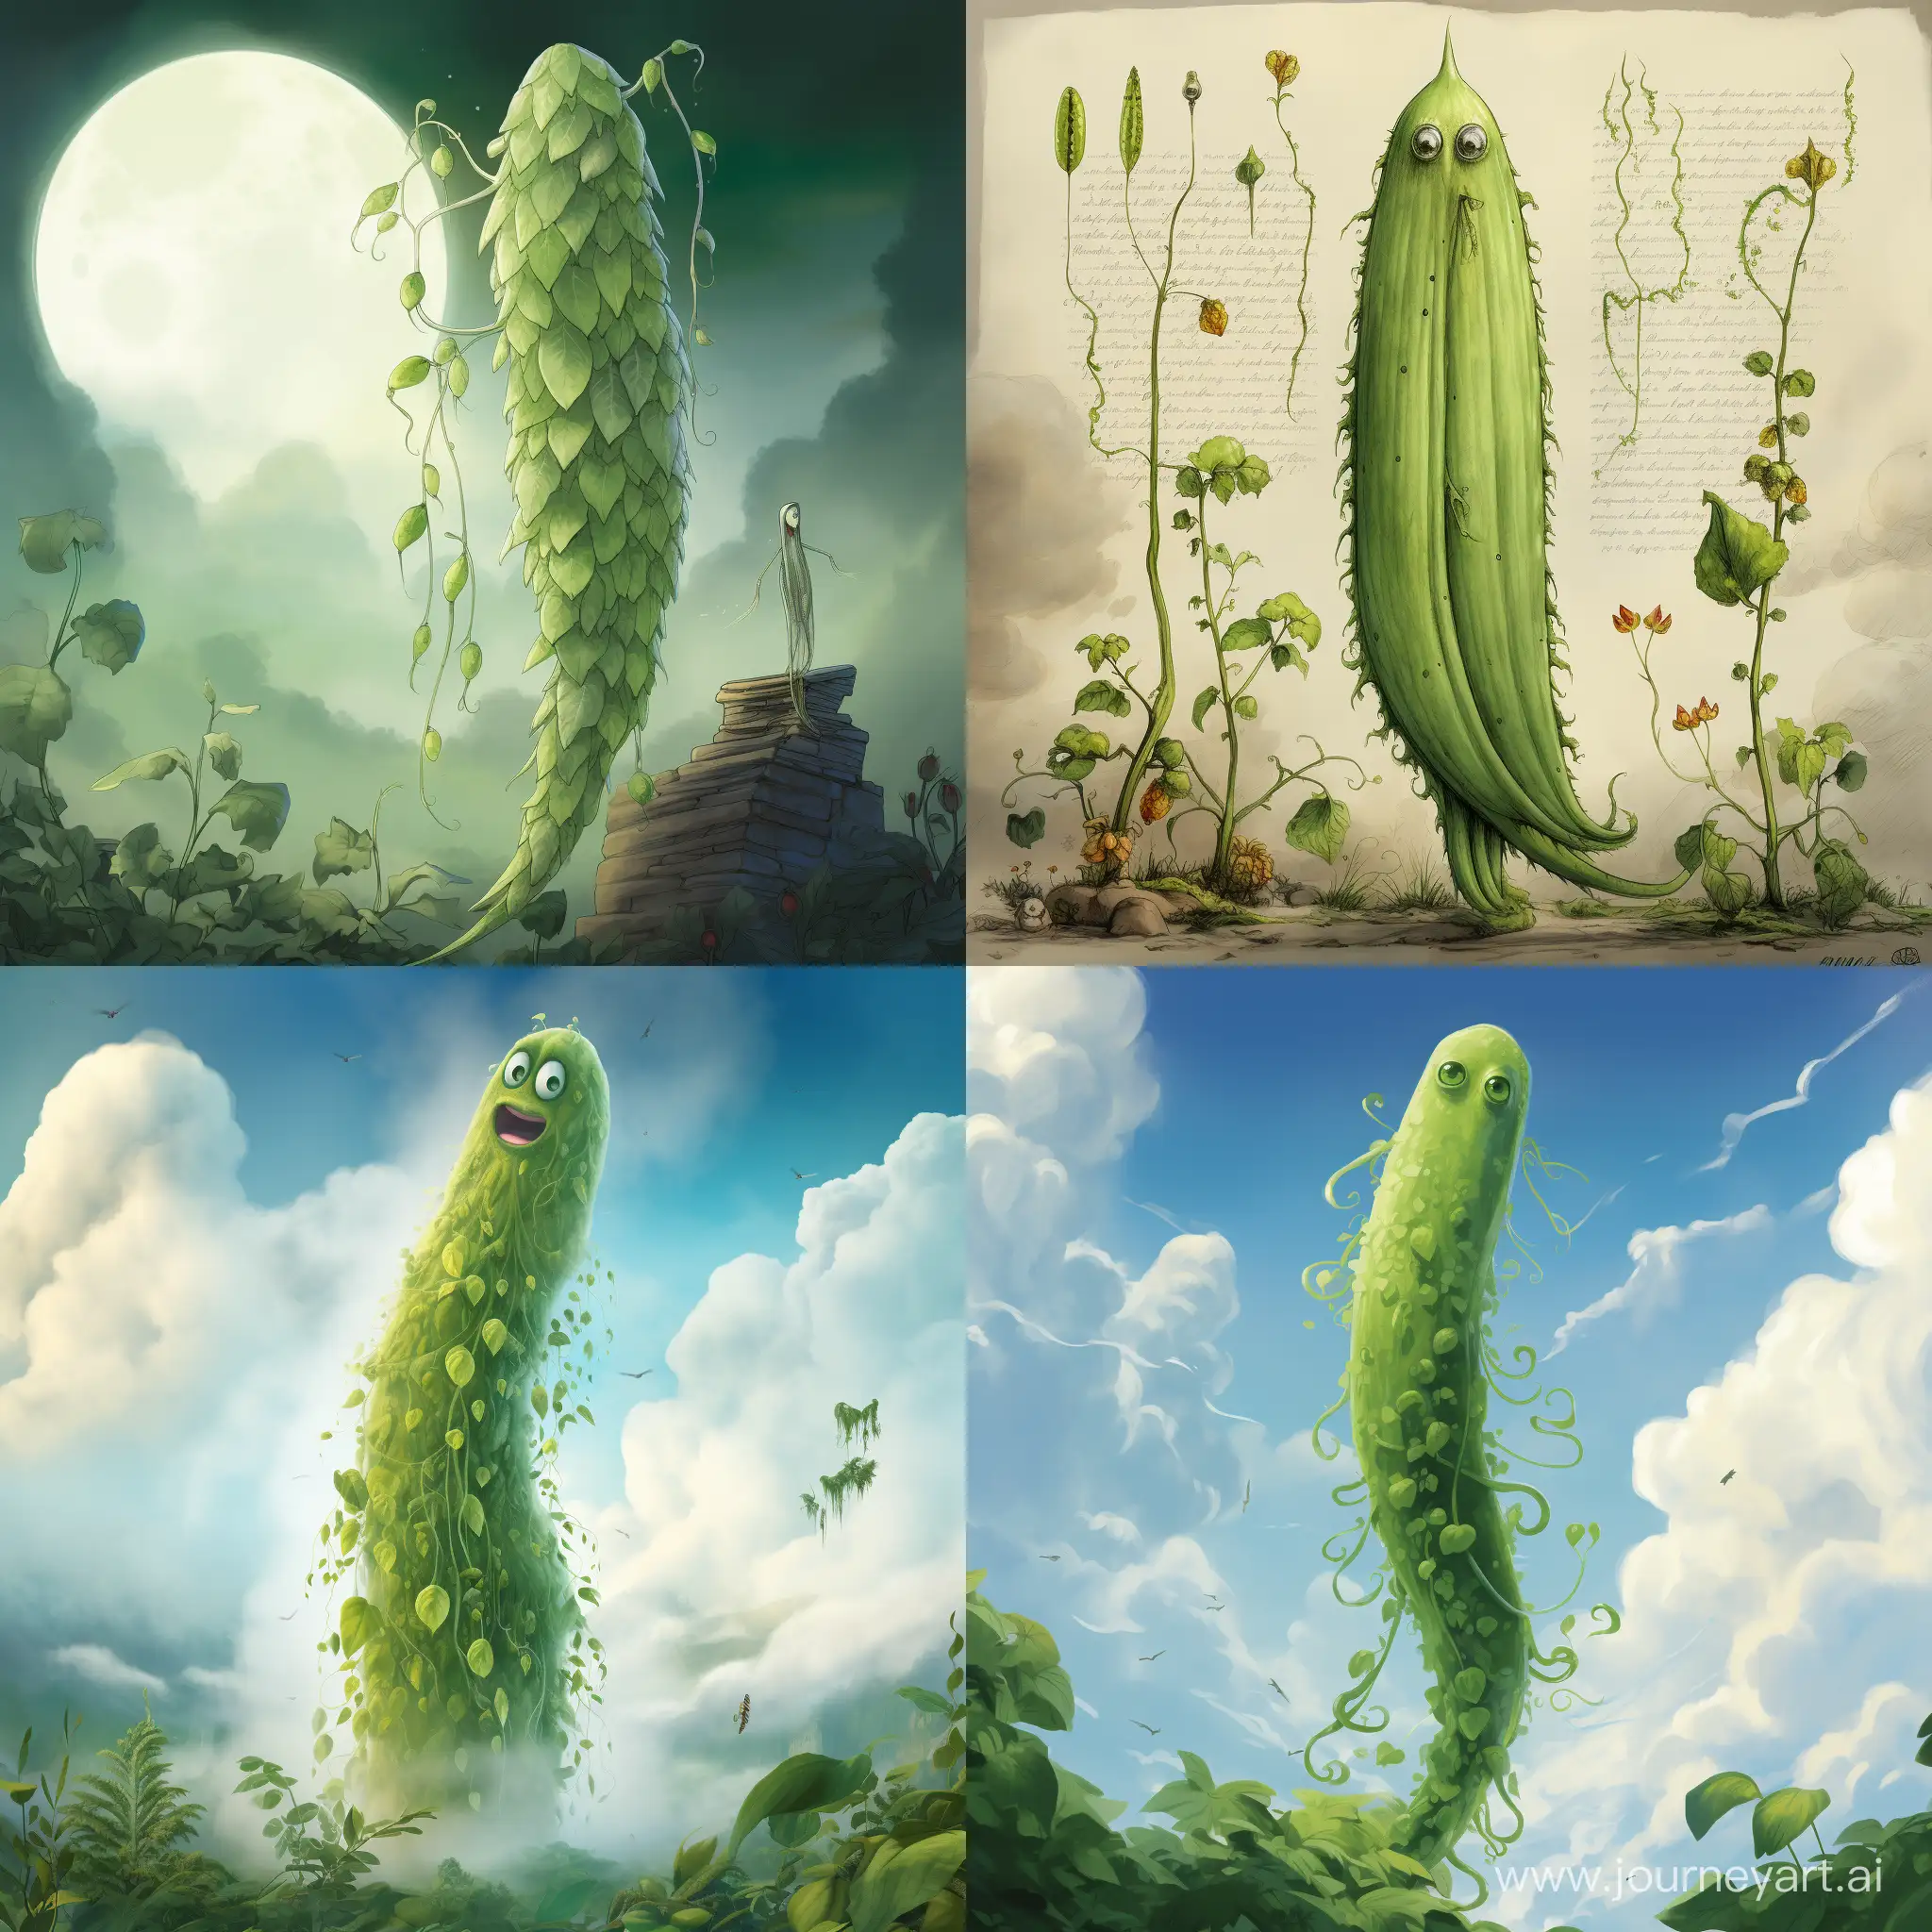 Imagine Příběhoun as a tall bean-like creature with a soft shade of green. Its body could have a texture reminiscent of old books, and a beanstalk-like crest would twirl like a vine with a few beans. Eyes might radiate a magical light, and gentle sparks would emanate from them while telling stories. Delicate clouds would surround its figure, symbolizing its connection with clouds and stories.